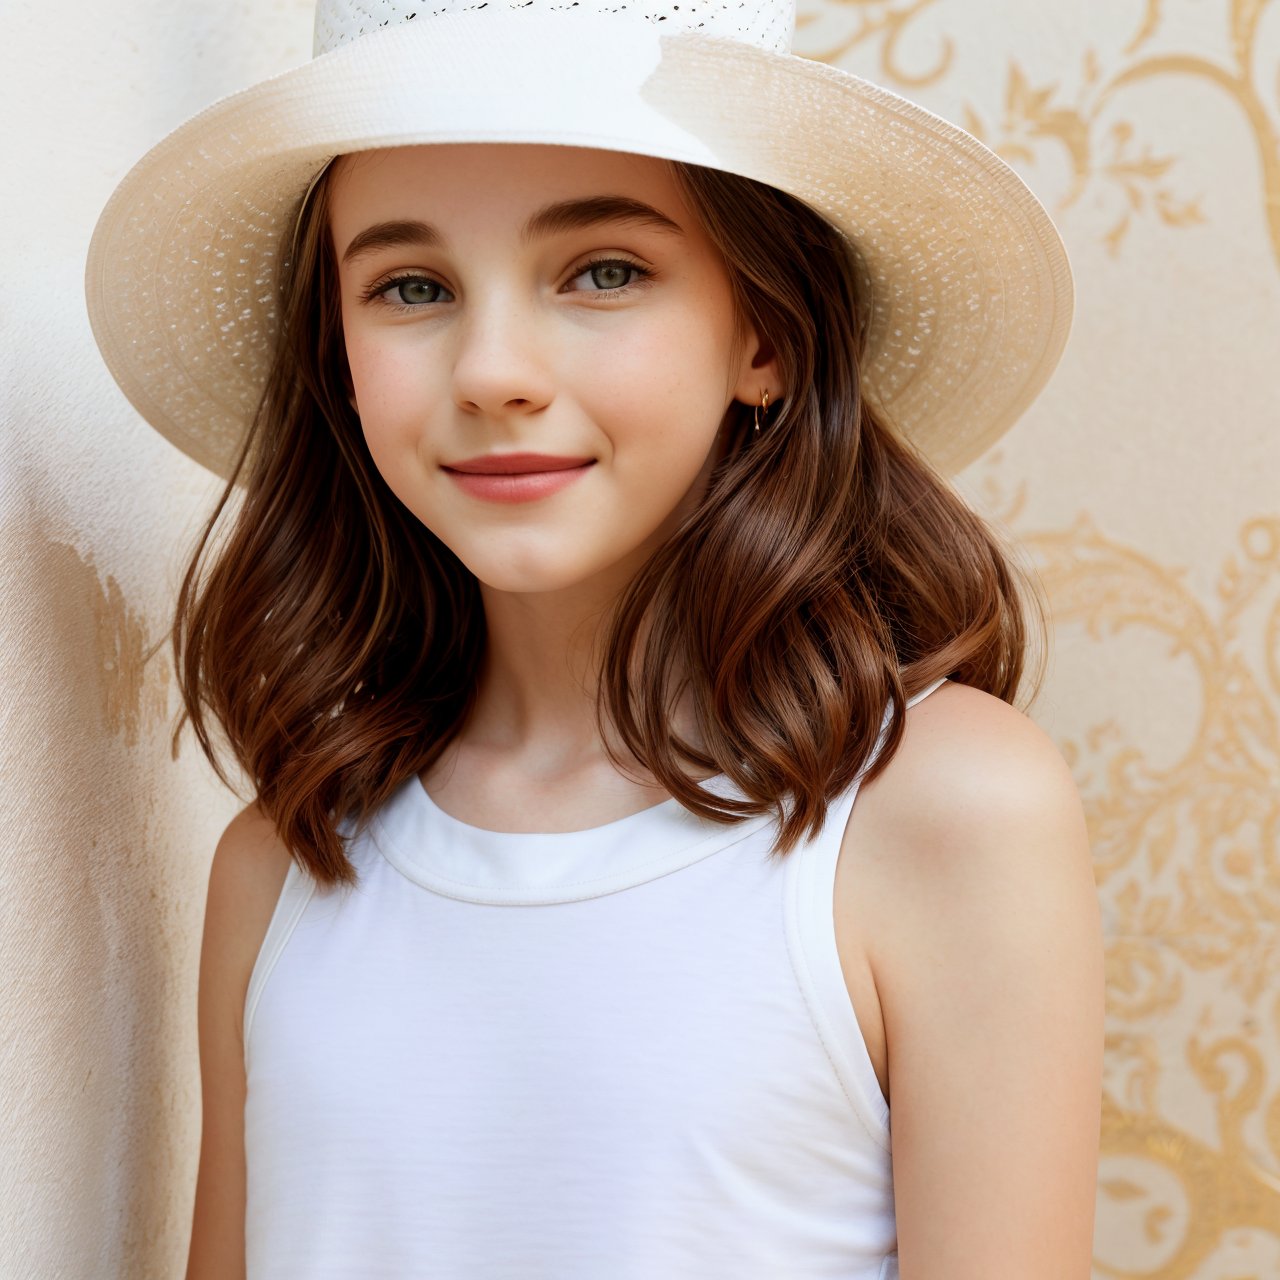 SFW, best quality, extra resolution, wallpaper, HD quality, HD, HQ, 4K, looking back, profile of cute (AIDA_LoRA_arusso:1.15) <lora:AIDA_LoRA_arusso:0.90> in a t-shirt and with a white hat posing for a picture in front of golden wall with pattern, leaning on wall, young teen girl, naughty, funny, happy, playful, intimate, flirting with camera, cinematic, insane level of details, intricate pattern, studio photo, kkw-ph1, hdr, f1.8